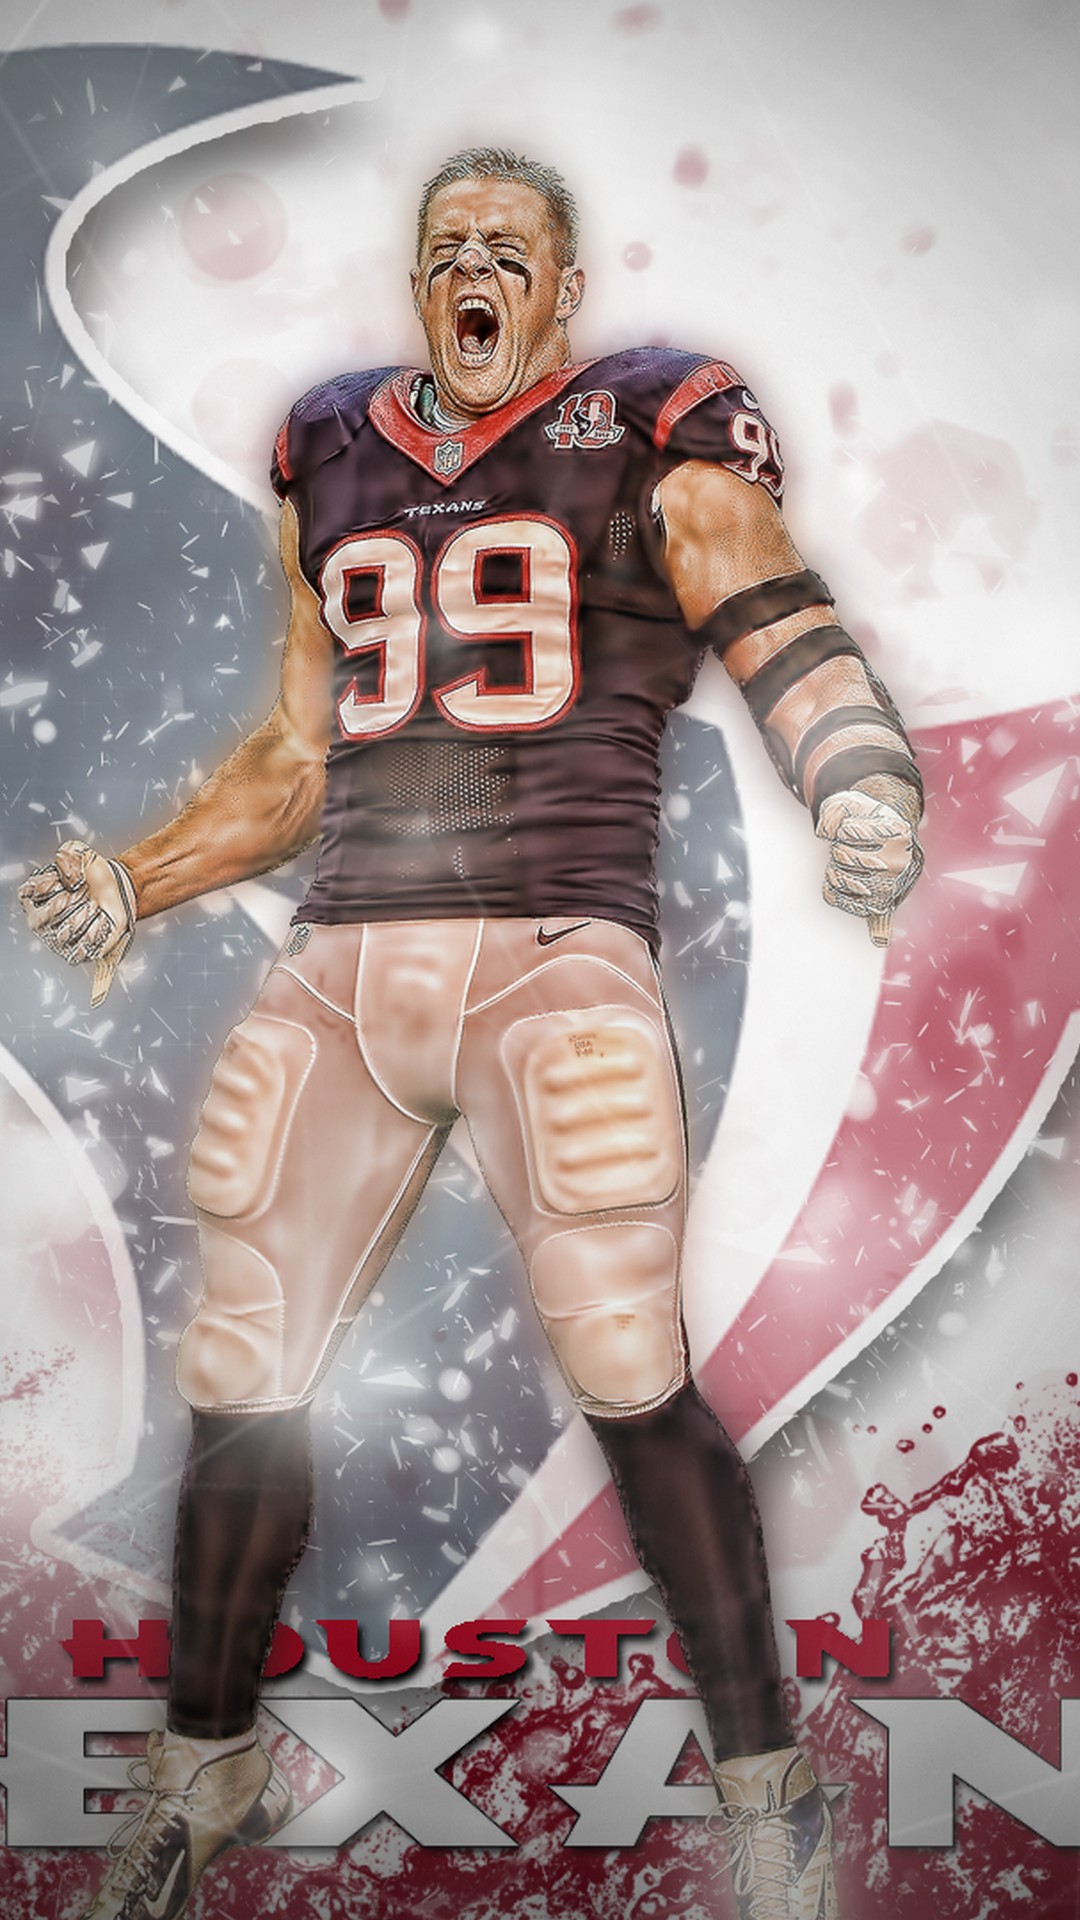 JJ Watt iPhone Wallpaper With high-resolution 1080X1920 pixel. Download and set as wallpaper for Apple iPhone X, XS Max, XR, 8, 7, 6, SE, iPad, Android